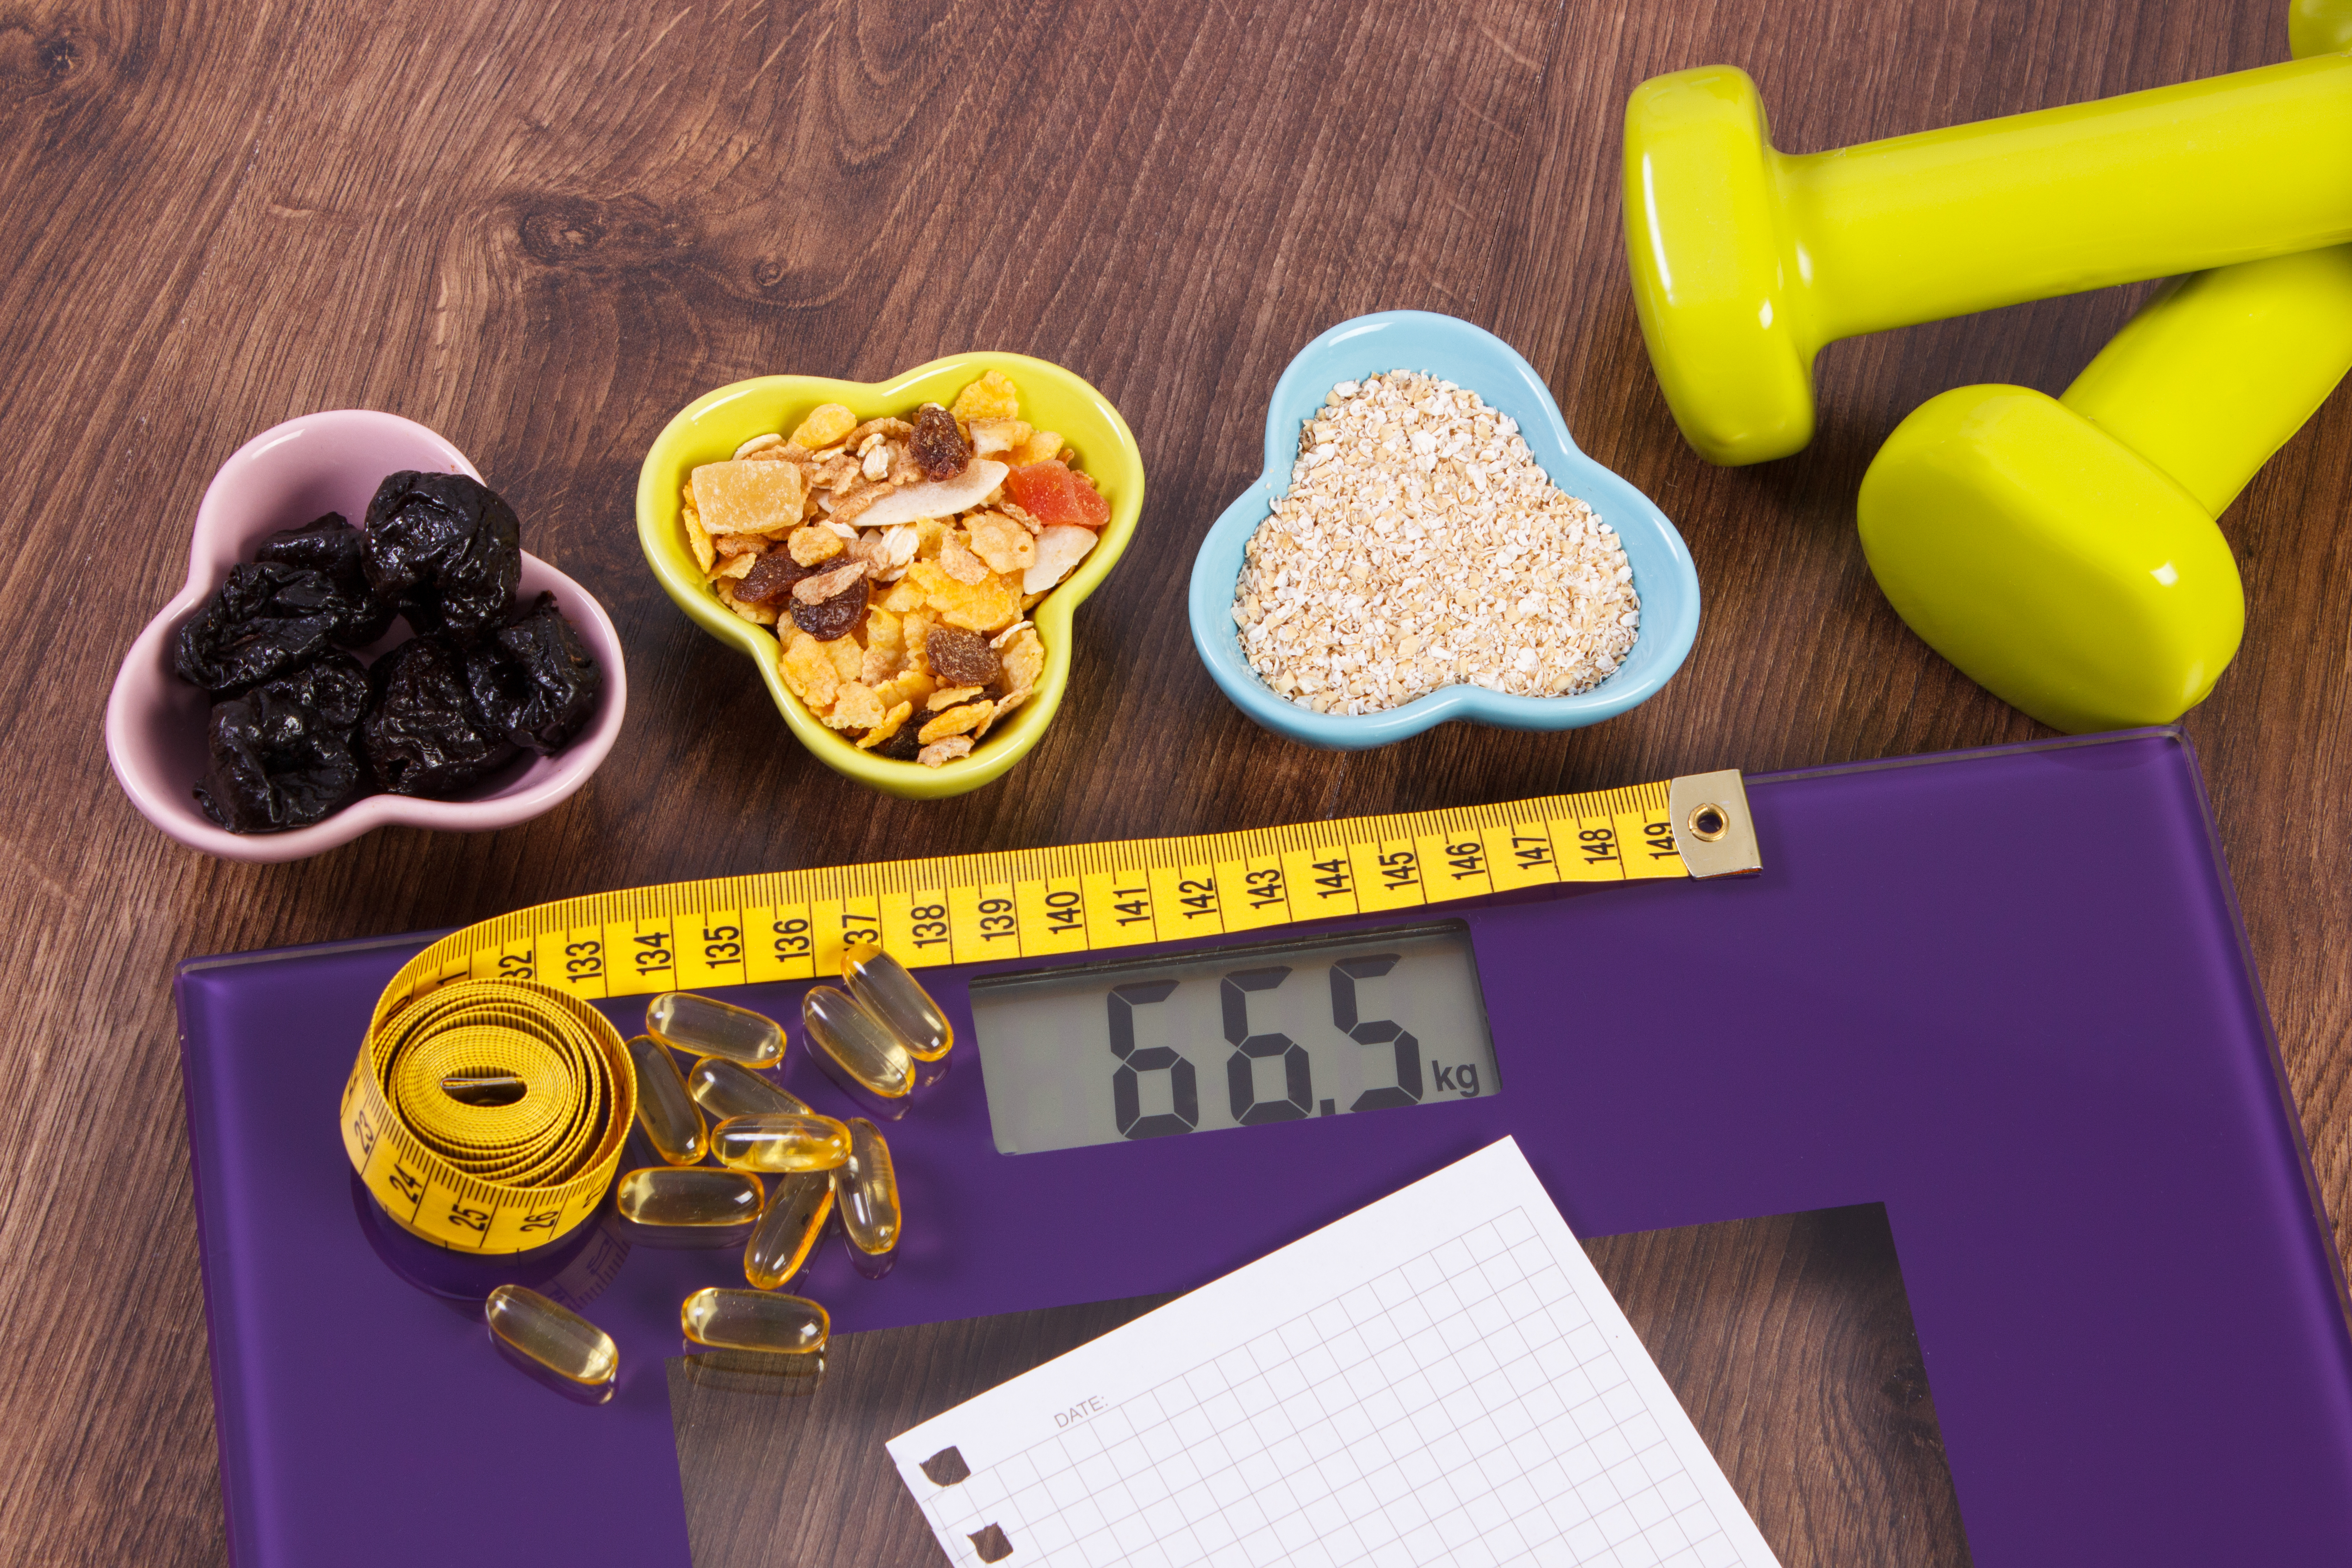 Tape measure on digital scale, tablets, dumbbells and muesli, healthy food and slimming concept